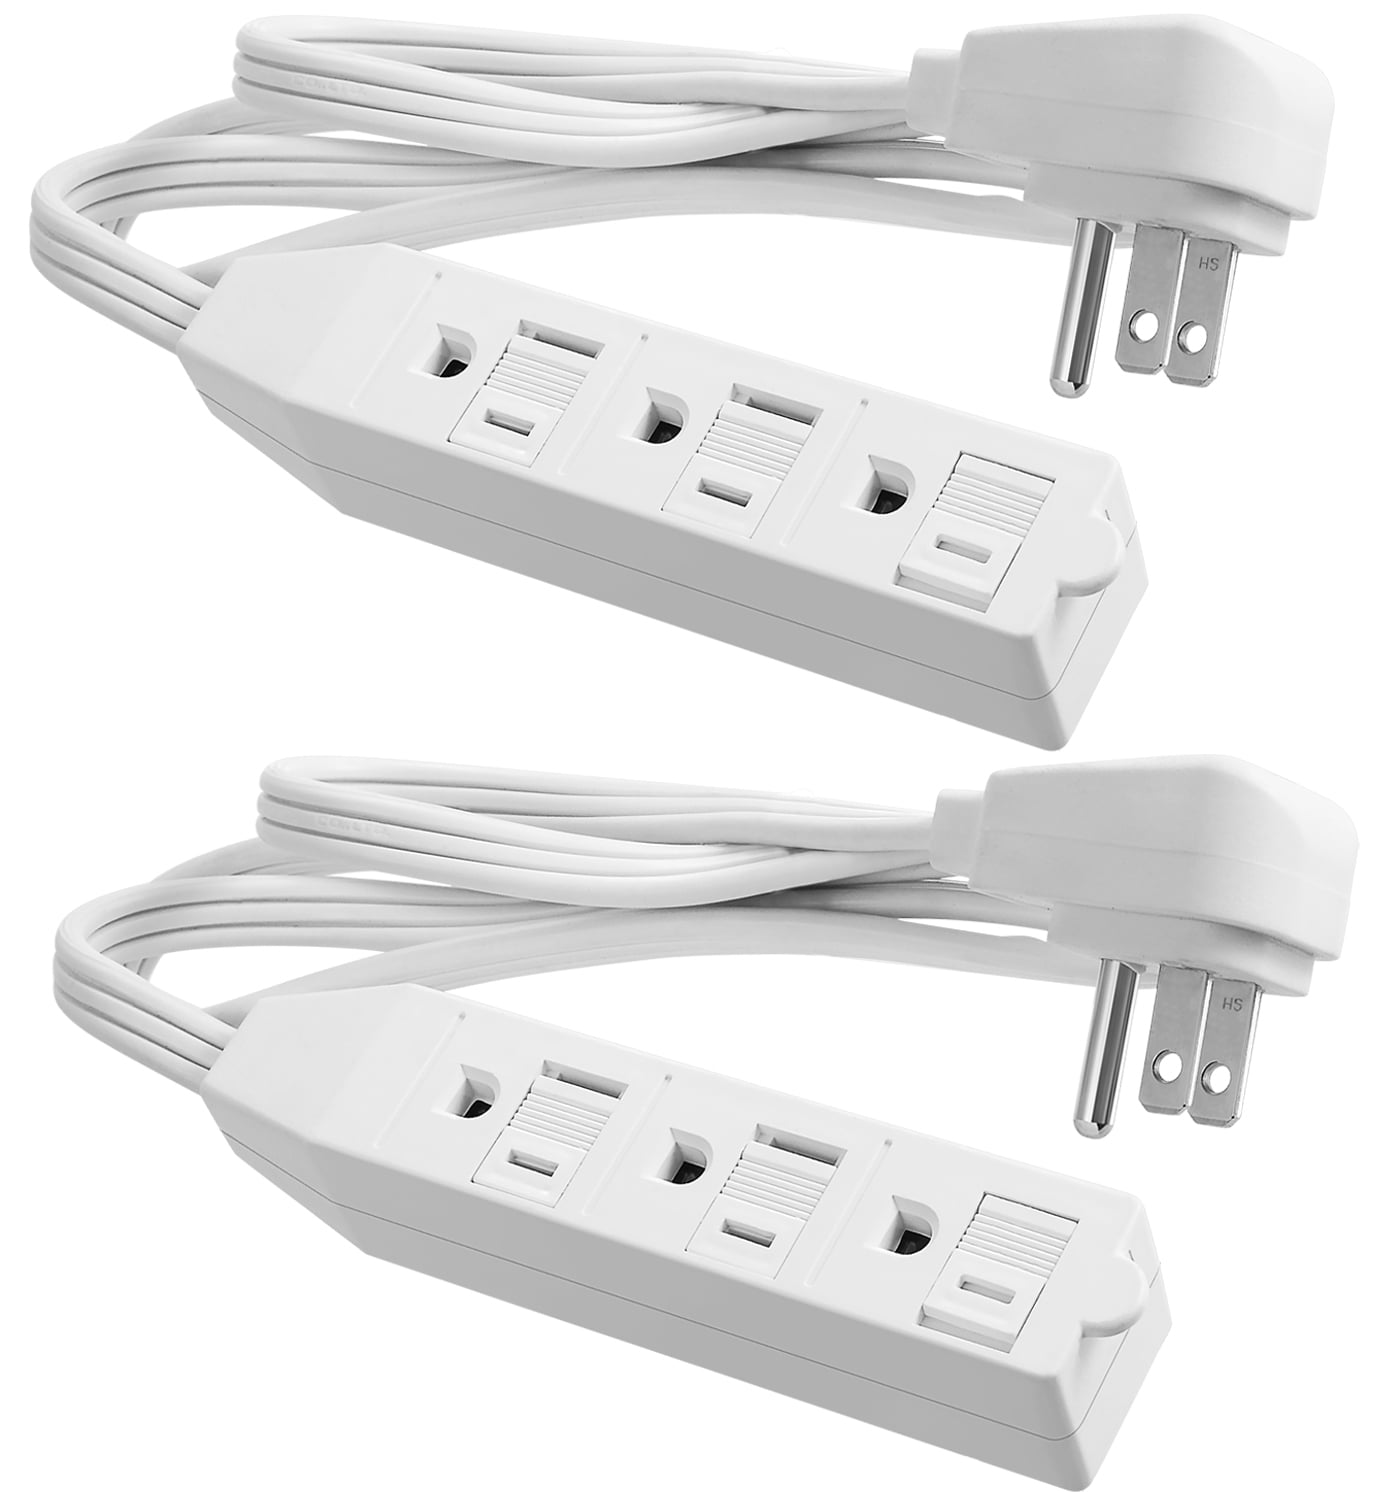 White Flat Plug Extension Cord, Short Power Cord with 3 Prong Standard  Ground sockets, Basic Indoor 3-pin Ground Cable, UL Listed（ 8FT, 2PK） 